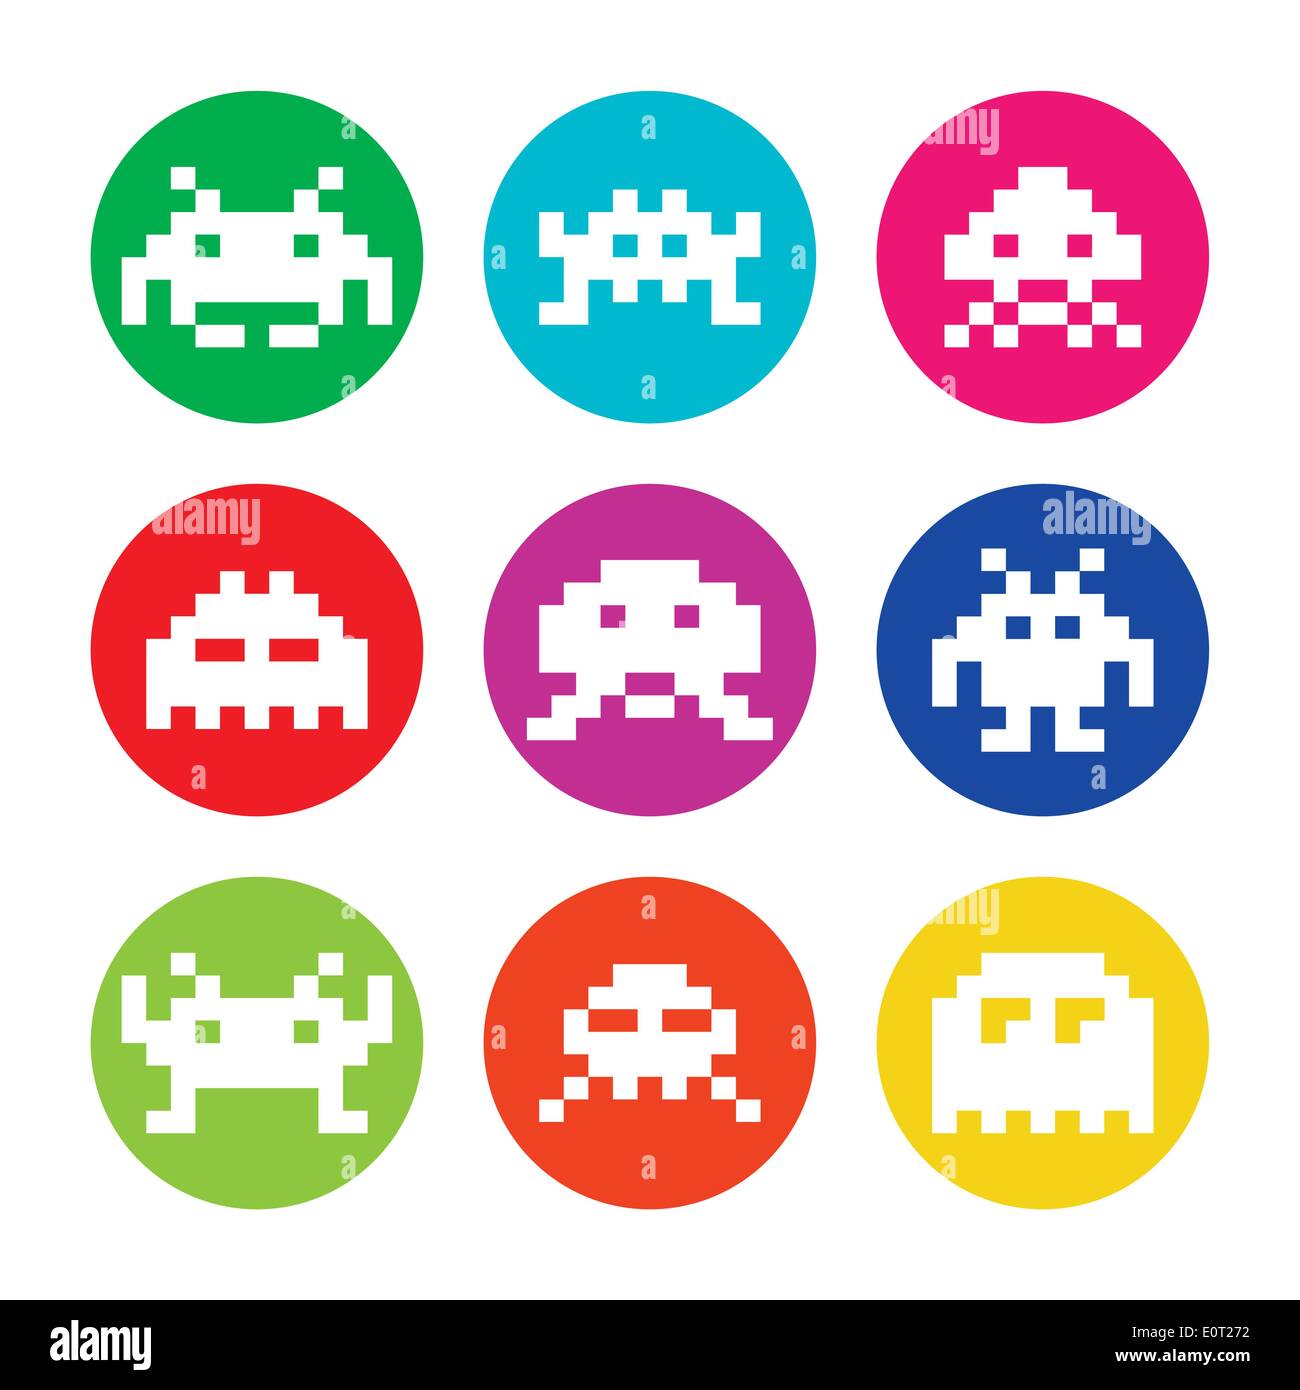 Space invaders, 8bit aliens round icons set Stock Vector